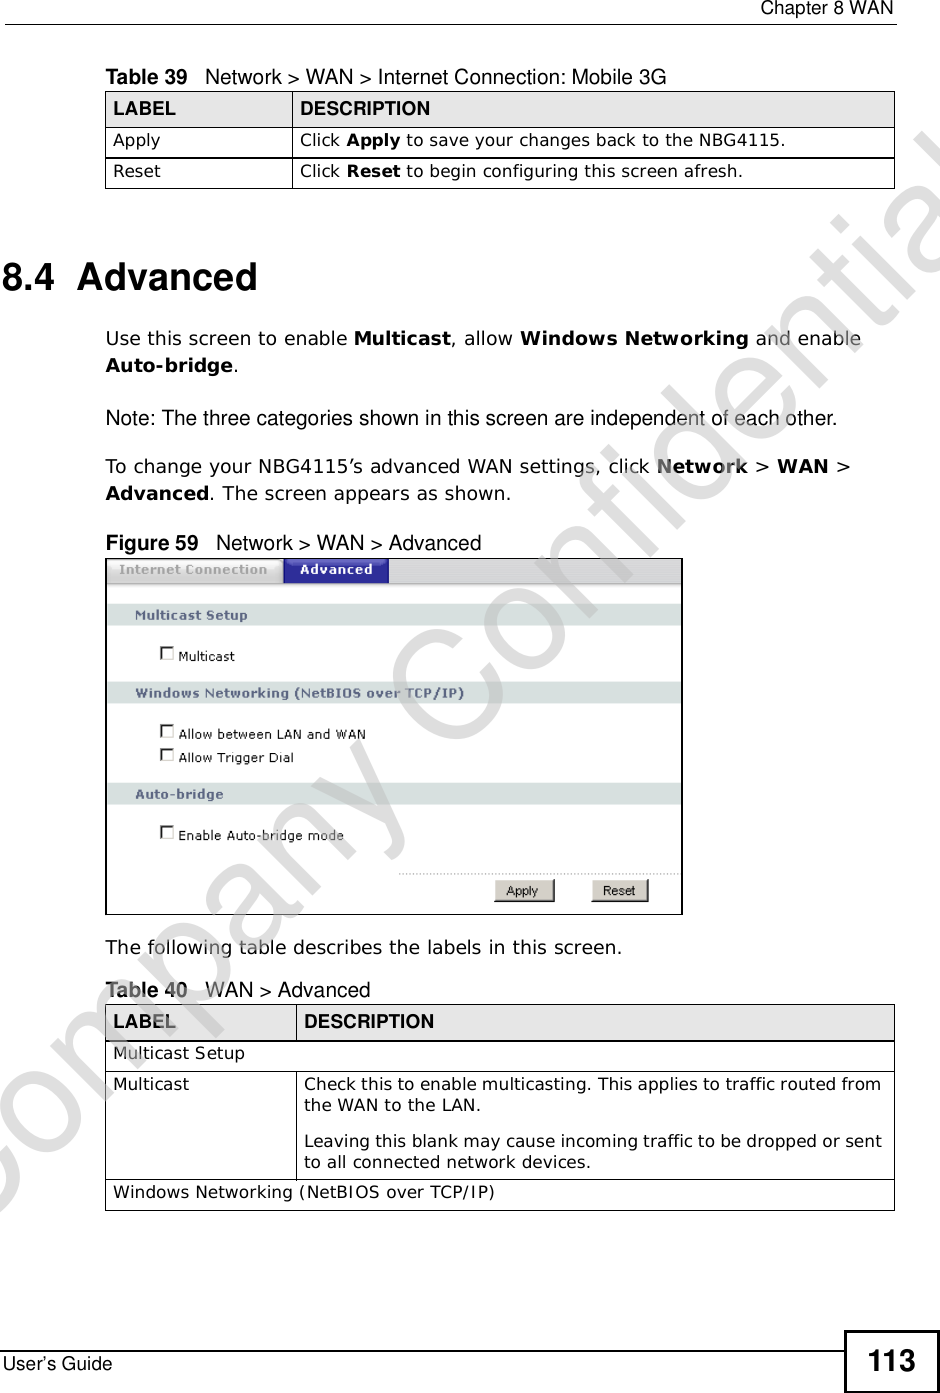  Chapter 8WANUser’s Guide 1138.4  AdvancedUse this screen to enable Multicast, allow Windows Networking and enable Auto-bridge.Note: The three categories shown in this screen are independent of each other.  To change your NBG4115’s advanced WAN settings, click Network &gt; WAN &gt; Advanced. The screen appears as shown.Figure 59   Network &gt; WAN &gt; Advanced The following table describes the labels in this screen.Apply Click Apply to save your changes back to the NBG4115.Reset Click Reset to begin configuring this screen afresh.Table 39   Network &gt; WAN &gt; Internet Connection: Mobile 3GLABEL DESCRIPTIONTable 40   WAN &gt; AdvancedLABEL DESCRIPTIONMulticast SetupMulticast Check this to enable multicasting. This applies to traffic routed from the WAN to the LAN. Leaving this blank may cause incoming traffic to be dropped or sent to all connected network devices.Windows Networking (NetBIOS over TCP/IP)Company Confidential